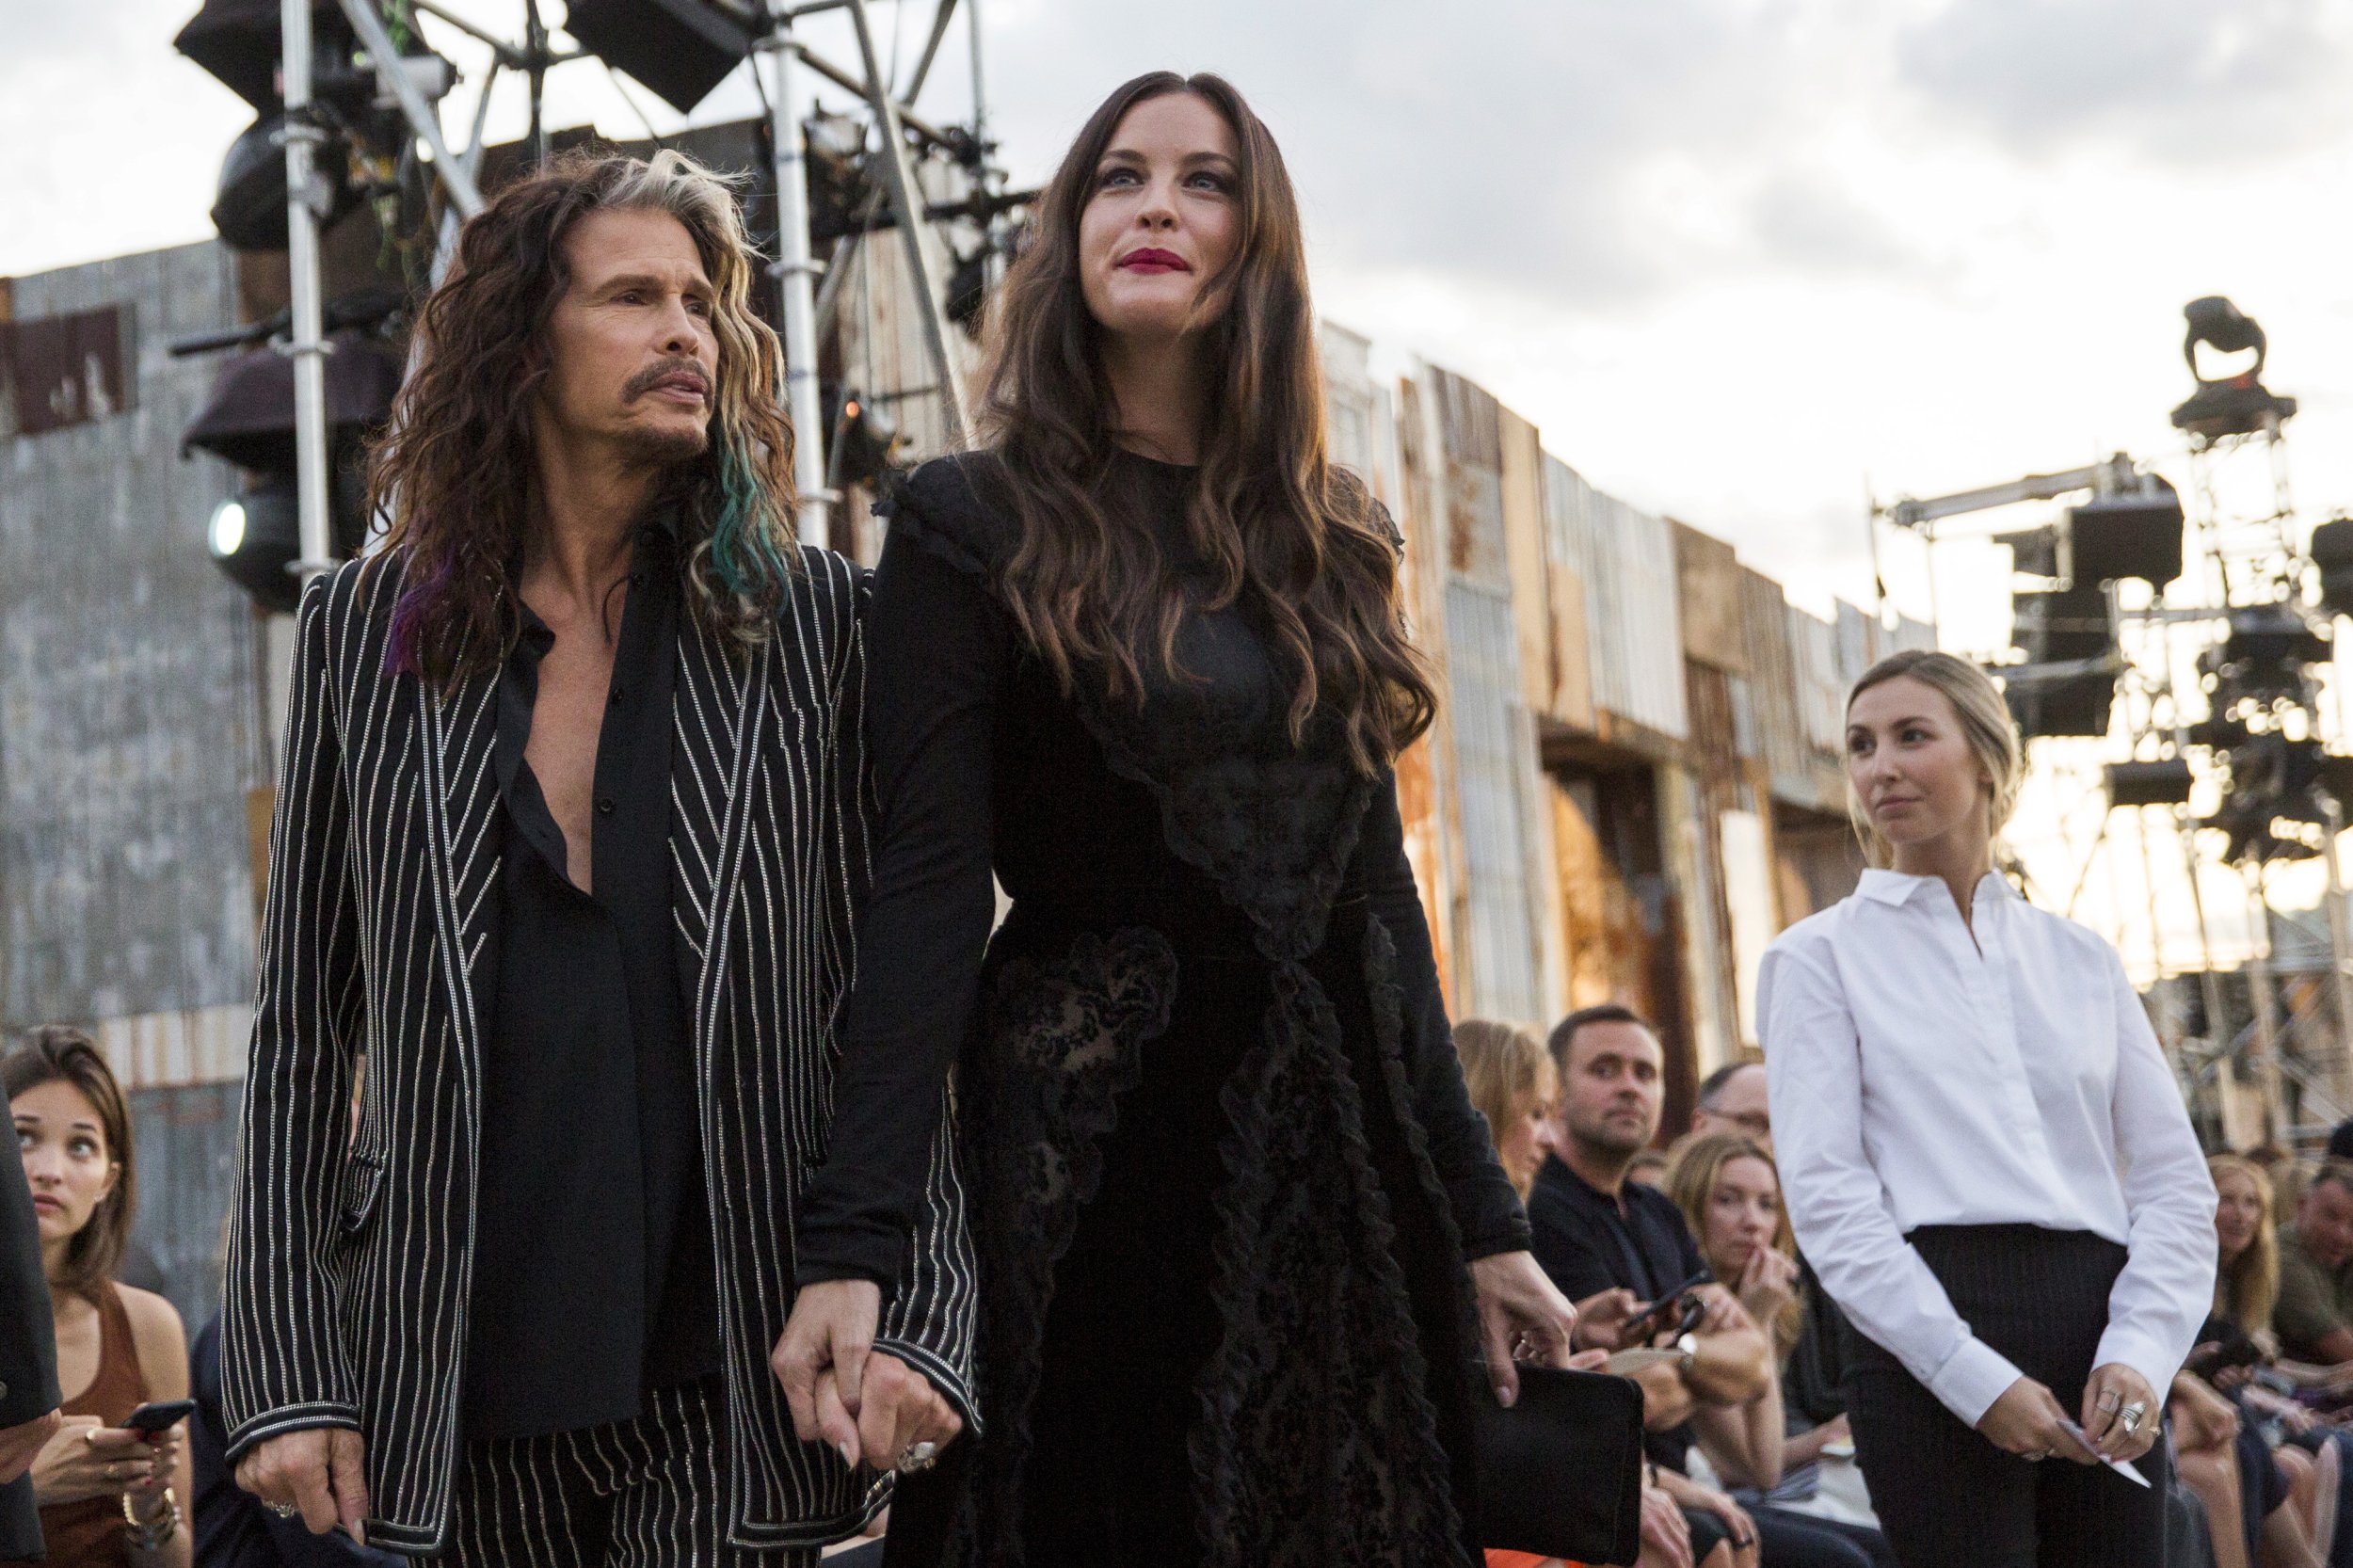 1520 Singer Steven Tyler arrives with his daughter Liv Tyler for a presentation of the Givenchy SpringSummer 2016 collection